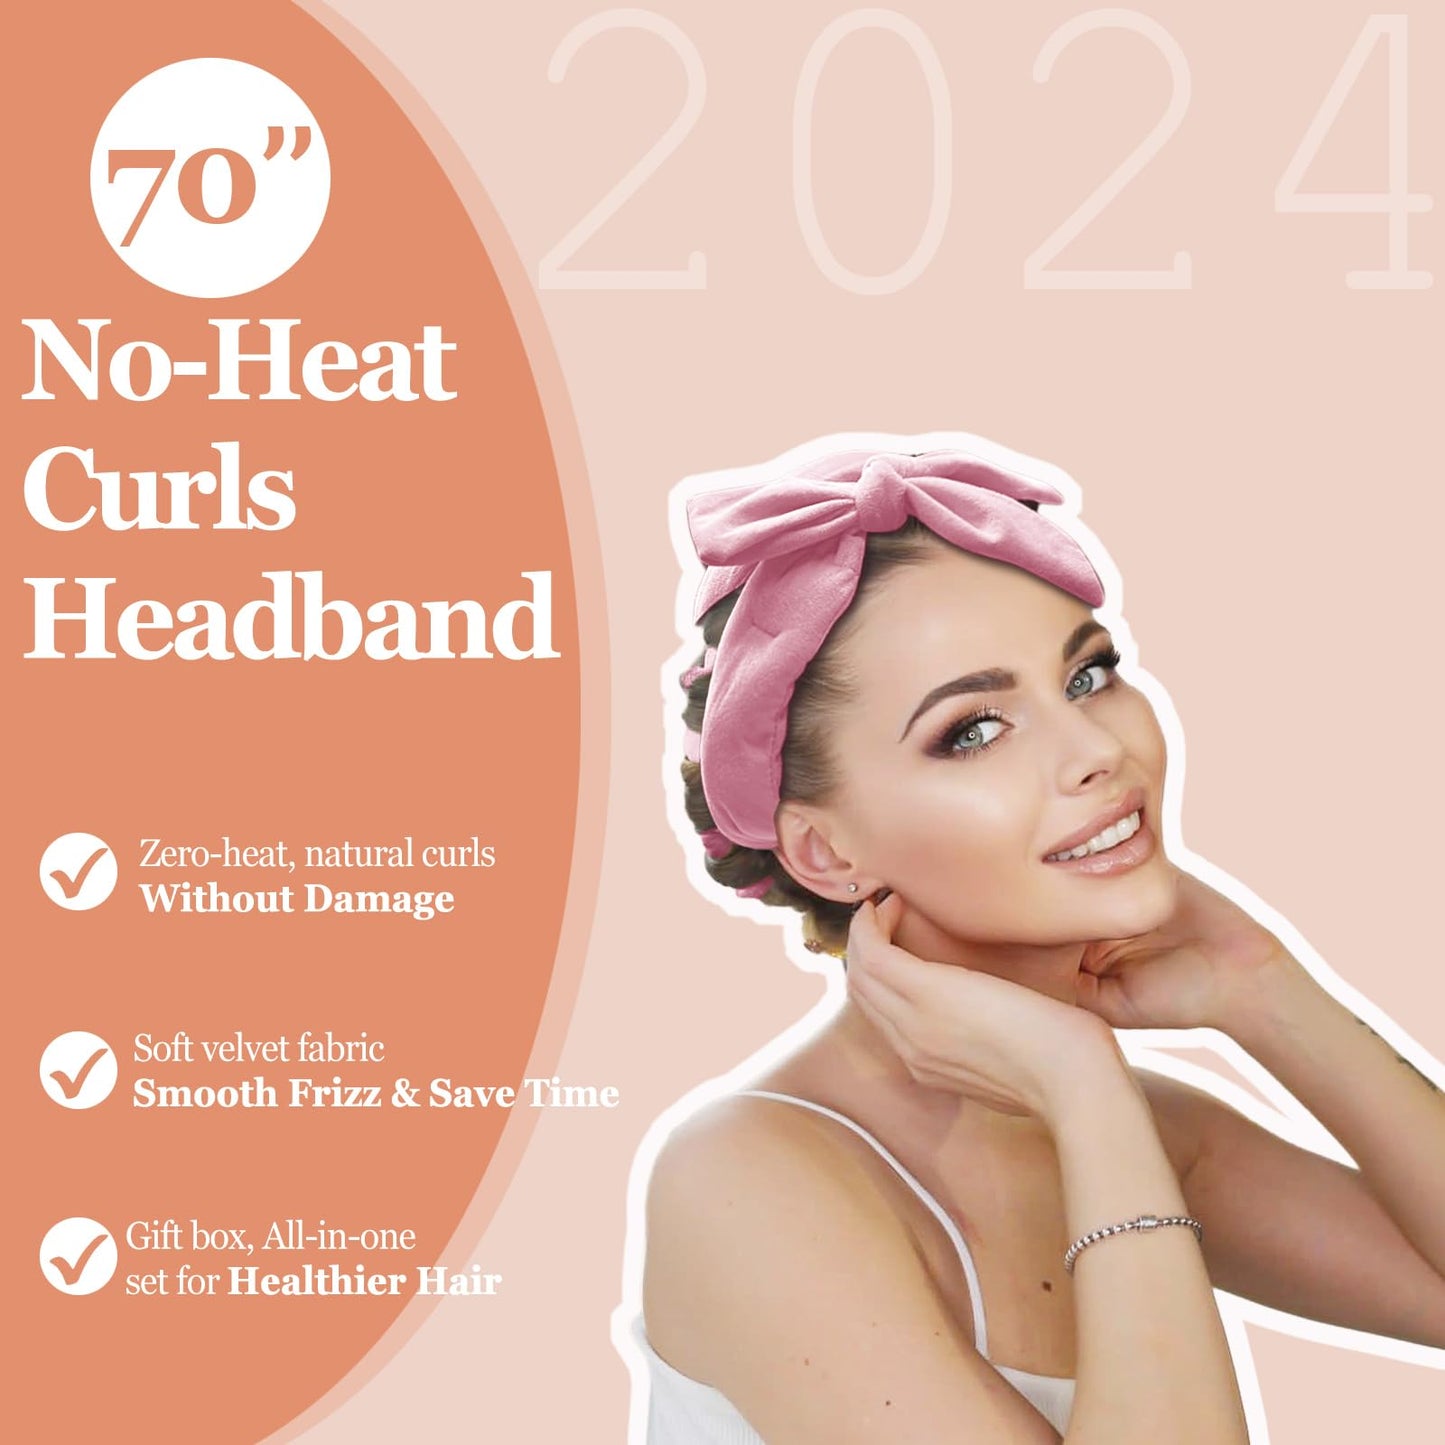 Heatless Curls Headband, Hair Rollers for Heatless Curls, 70" Velvet Heatless Curlers for Women Girls Overnight Curls, No Heat Hair Curlers to Sleep In - Pink